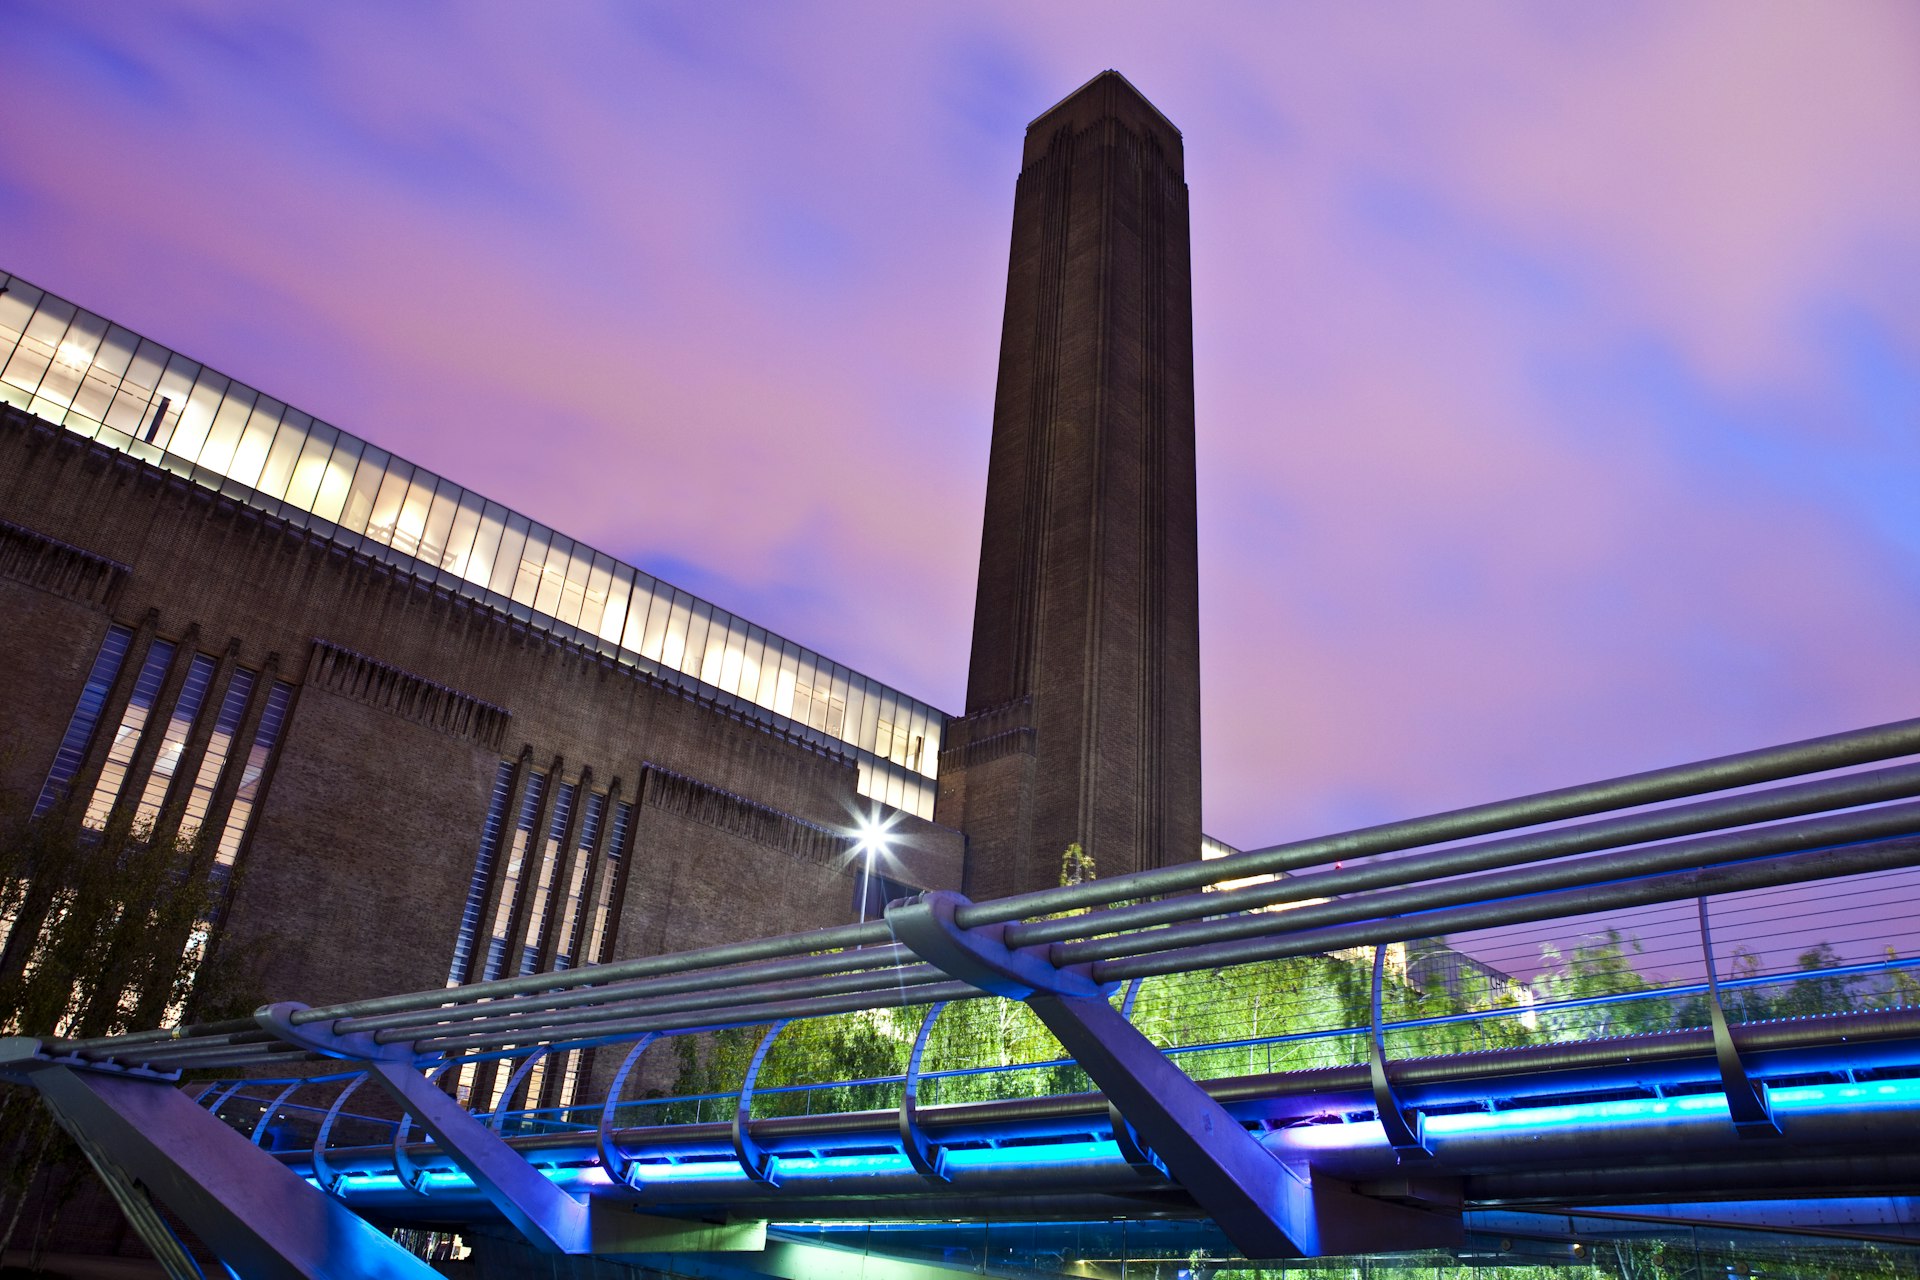 Tate Modern and the Millennium Bridge at dusk in London.